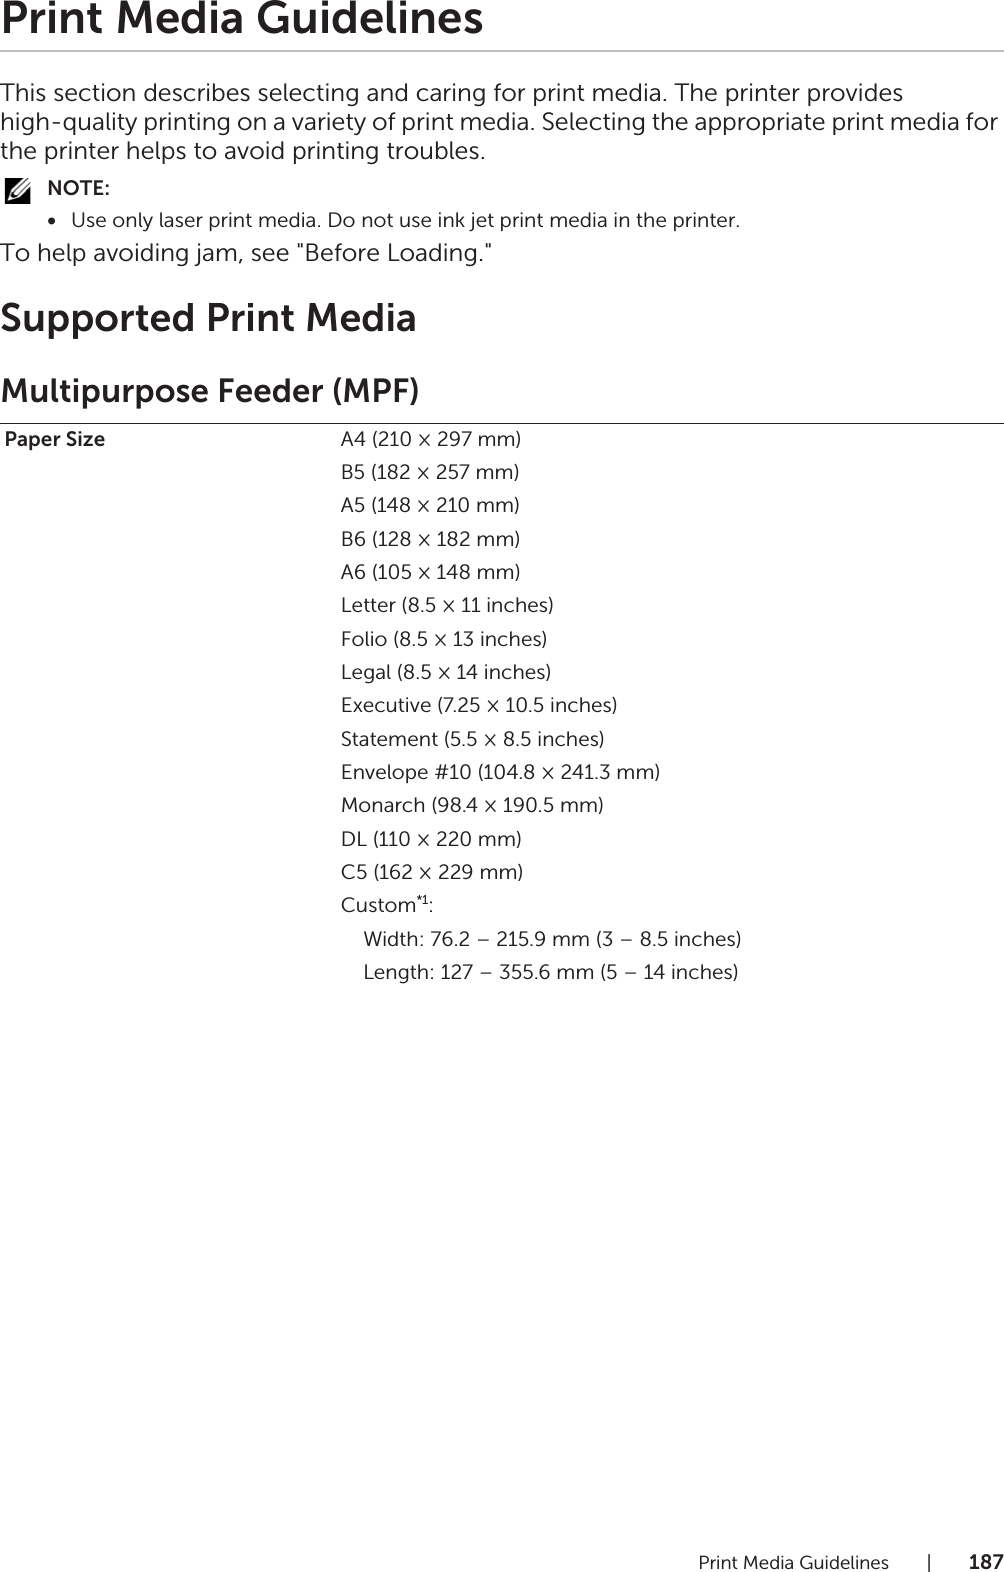 Print Media Guidelines |187Print Media GuidelinesThis section describes selecting and caring for print media. The printer provides high-quality printing on a variety of print media. Selecting the appropriate print media for the printer helps to avoid printing troubles.NOTE:•Use only laser print media. Do not use ink jet print media in the printer.To help avoiding jam, see &quot;Before Loading.&quot;Supported Print MediaMultipurpose Feeder (MPF)Paper Size A4 (210 × 297 mm)B5 (182 × 257 mm)A5 (148 × 210 mm)B6 (128 × 182 mm)A6 (105 × 148 mm)Letter (8.5 × 11 inches)Folio (8.5 × 13 inches)Legal (8.5 × 14 inches)Executive (7.25 × 10.5 inches)Statement (5.5 × 8.5 inches)Envelope #10 (104.8 × 241.3 mm)Monarch (98.4 × 190.5 mm)DL (110 × 220 mm)C5 (162 × 229 mm)Custom*1:    Width: 76.2 – 215.9 mm (3 – 8.5 inches)    Length: 127 – 355.6 mm (5 – 14 inches)